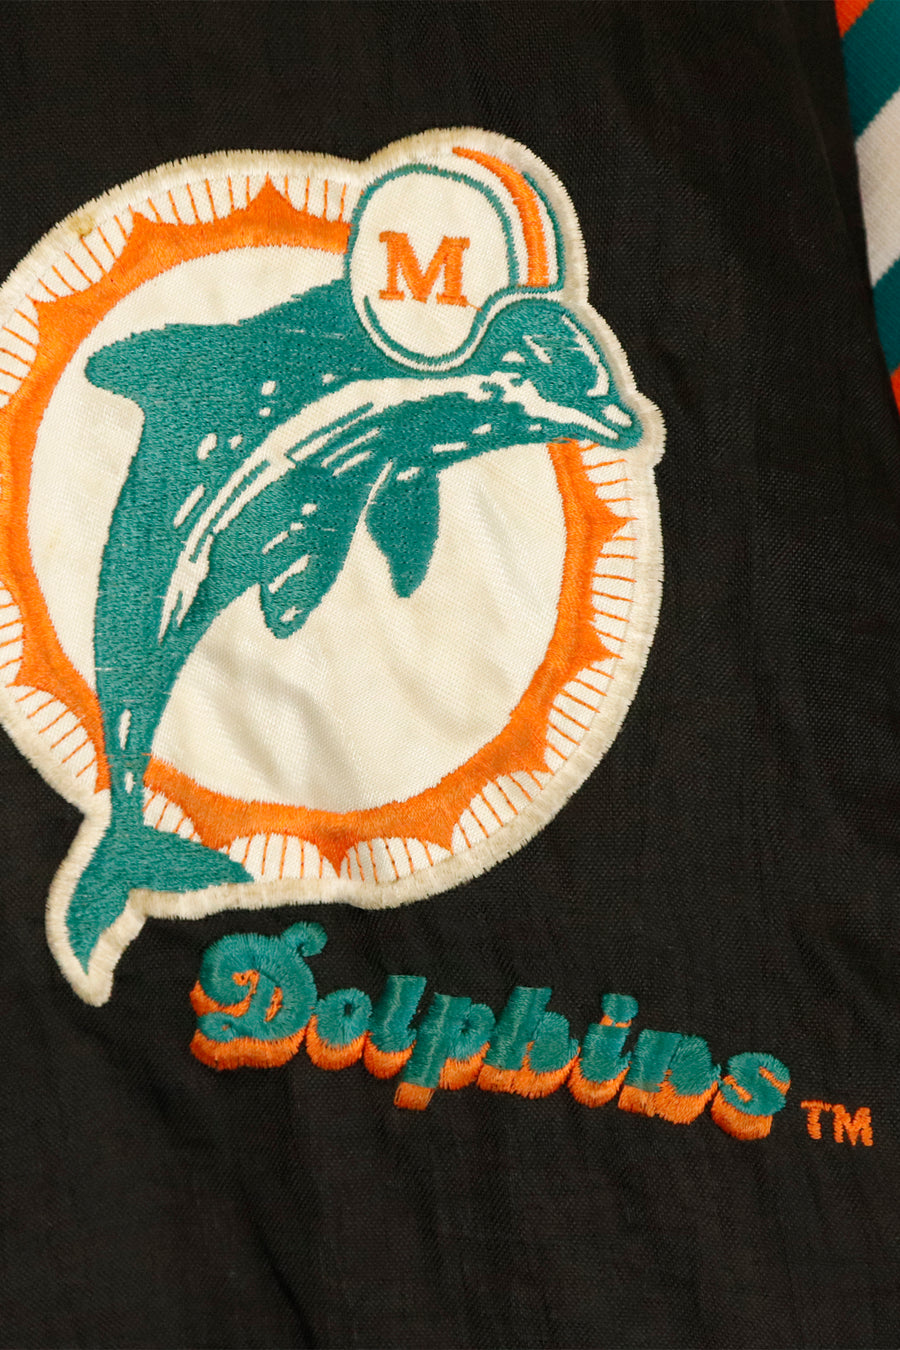 Vintage Nfl Miami Dolphins Full Zip Reversable Embroidered Patches Puff Jacket Quarter Collar Jacket